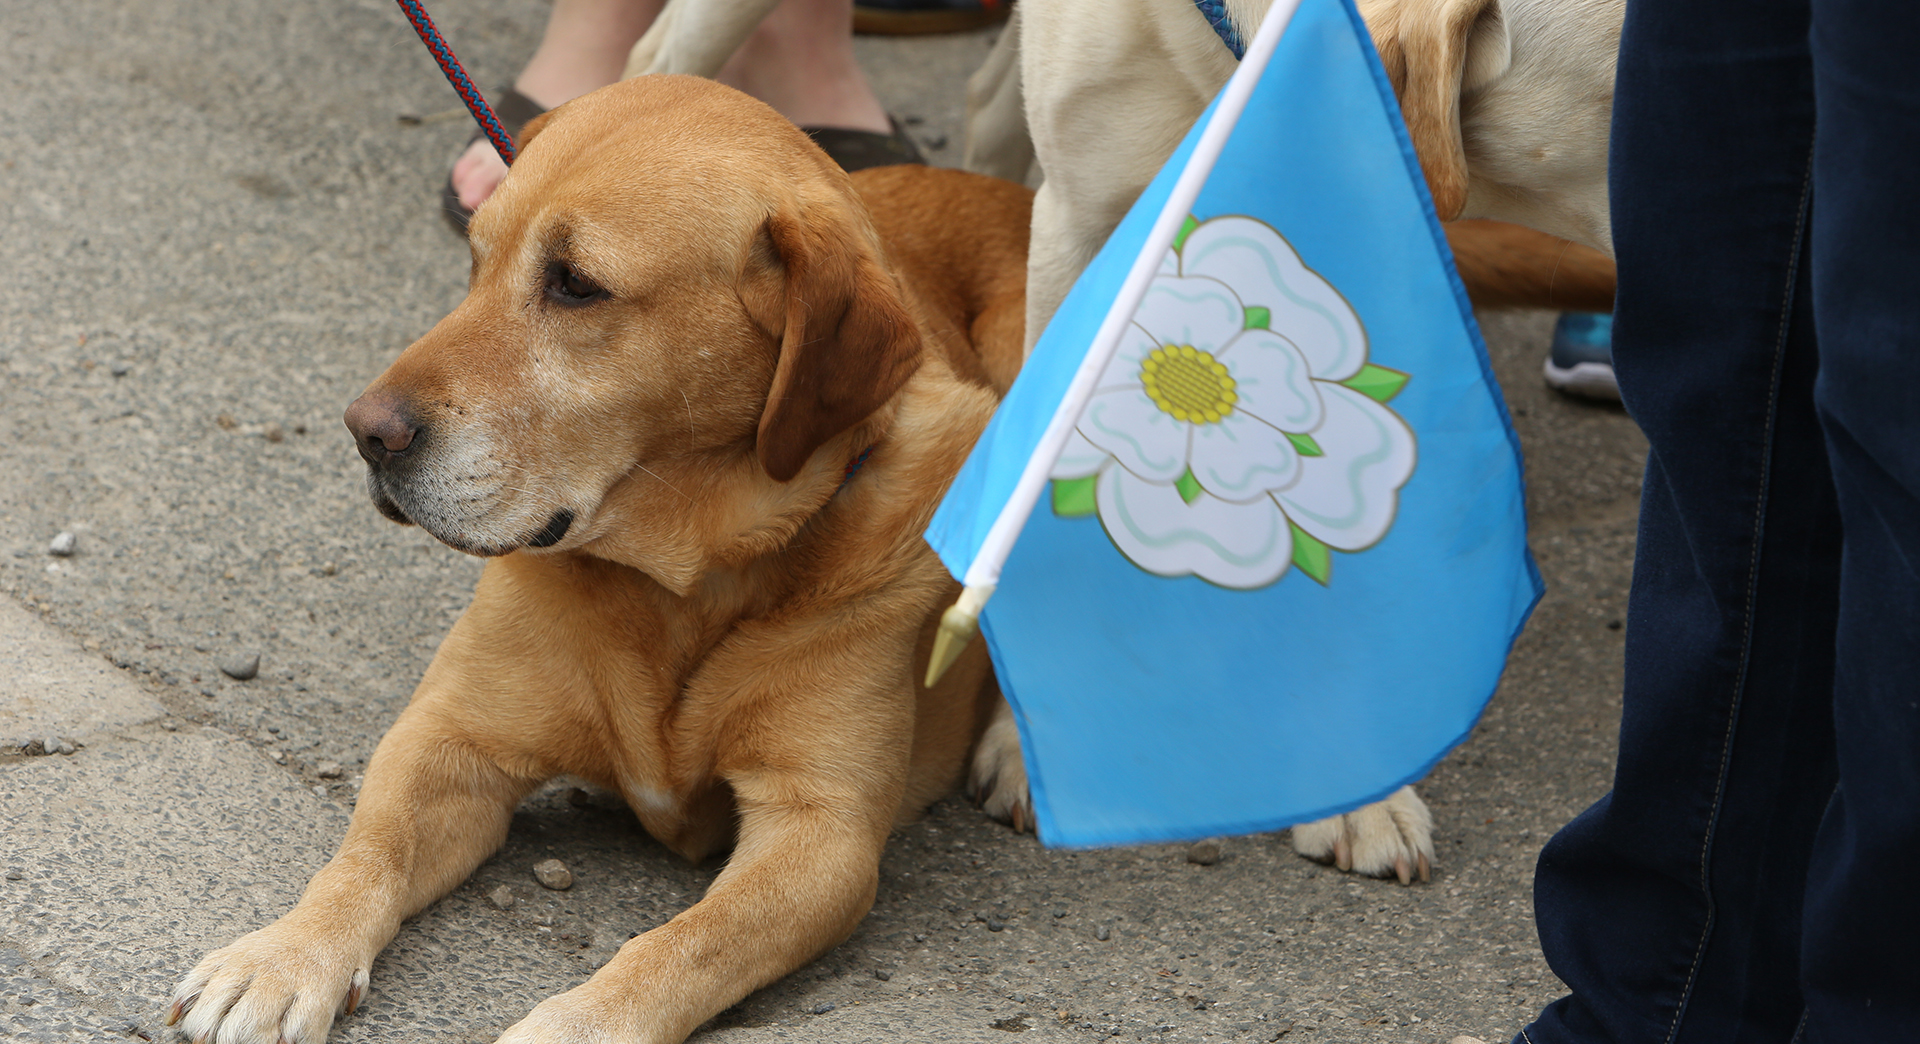 Dog with yorkshire flag